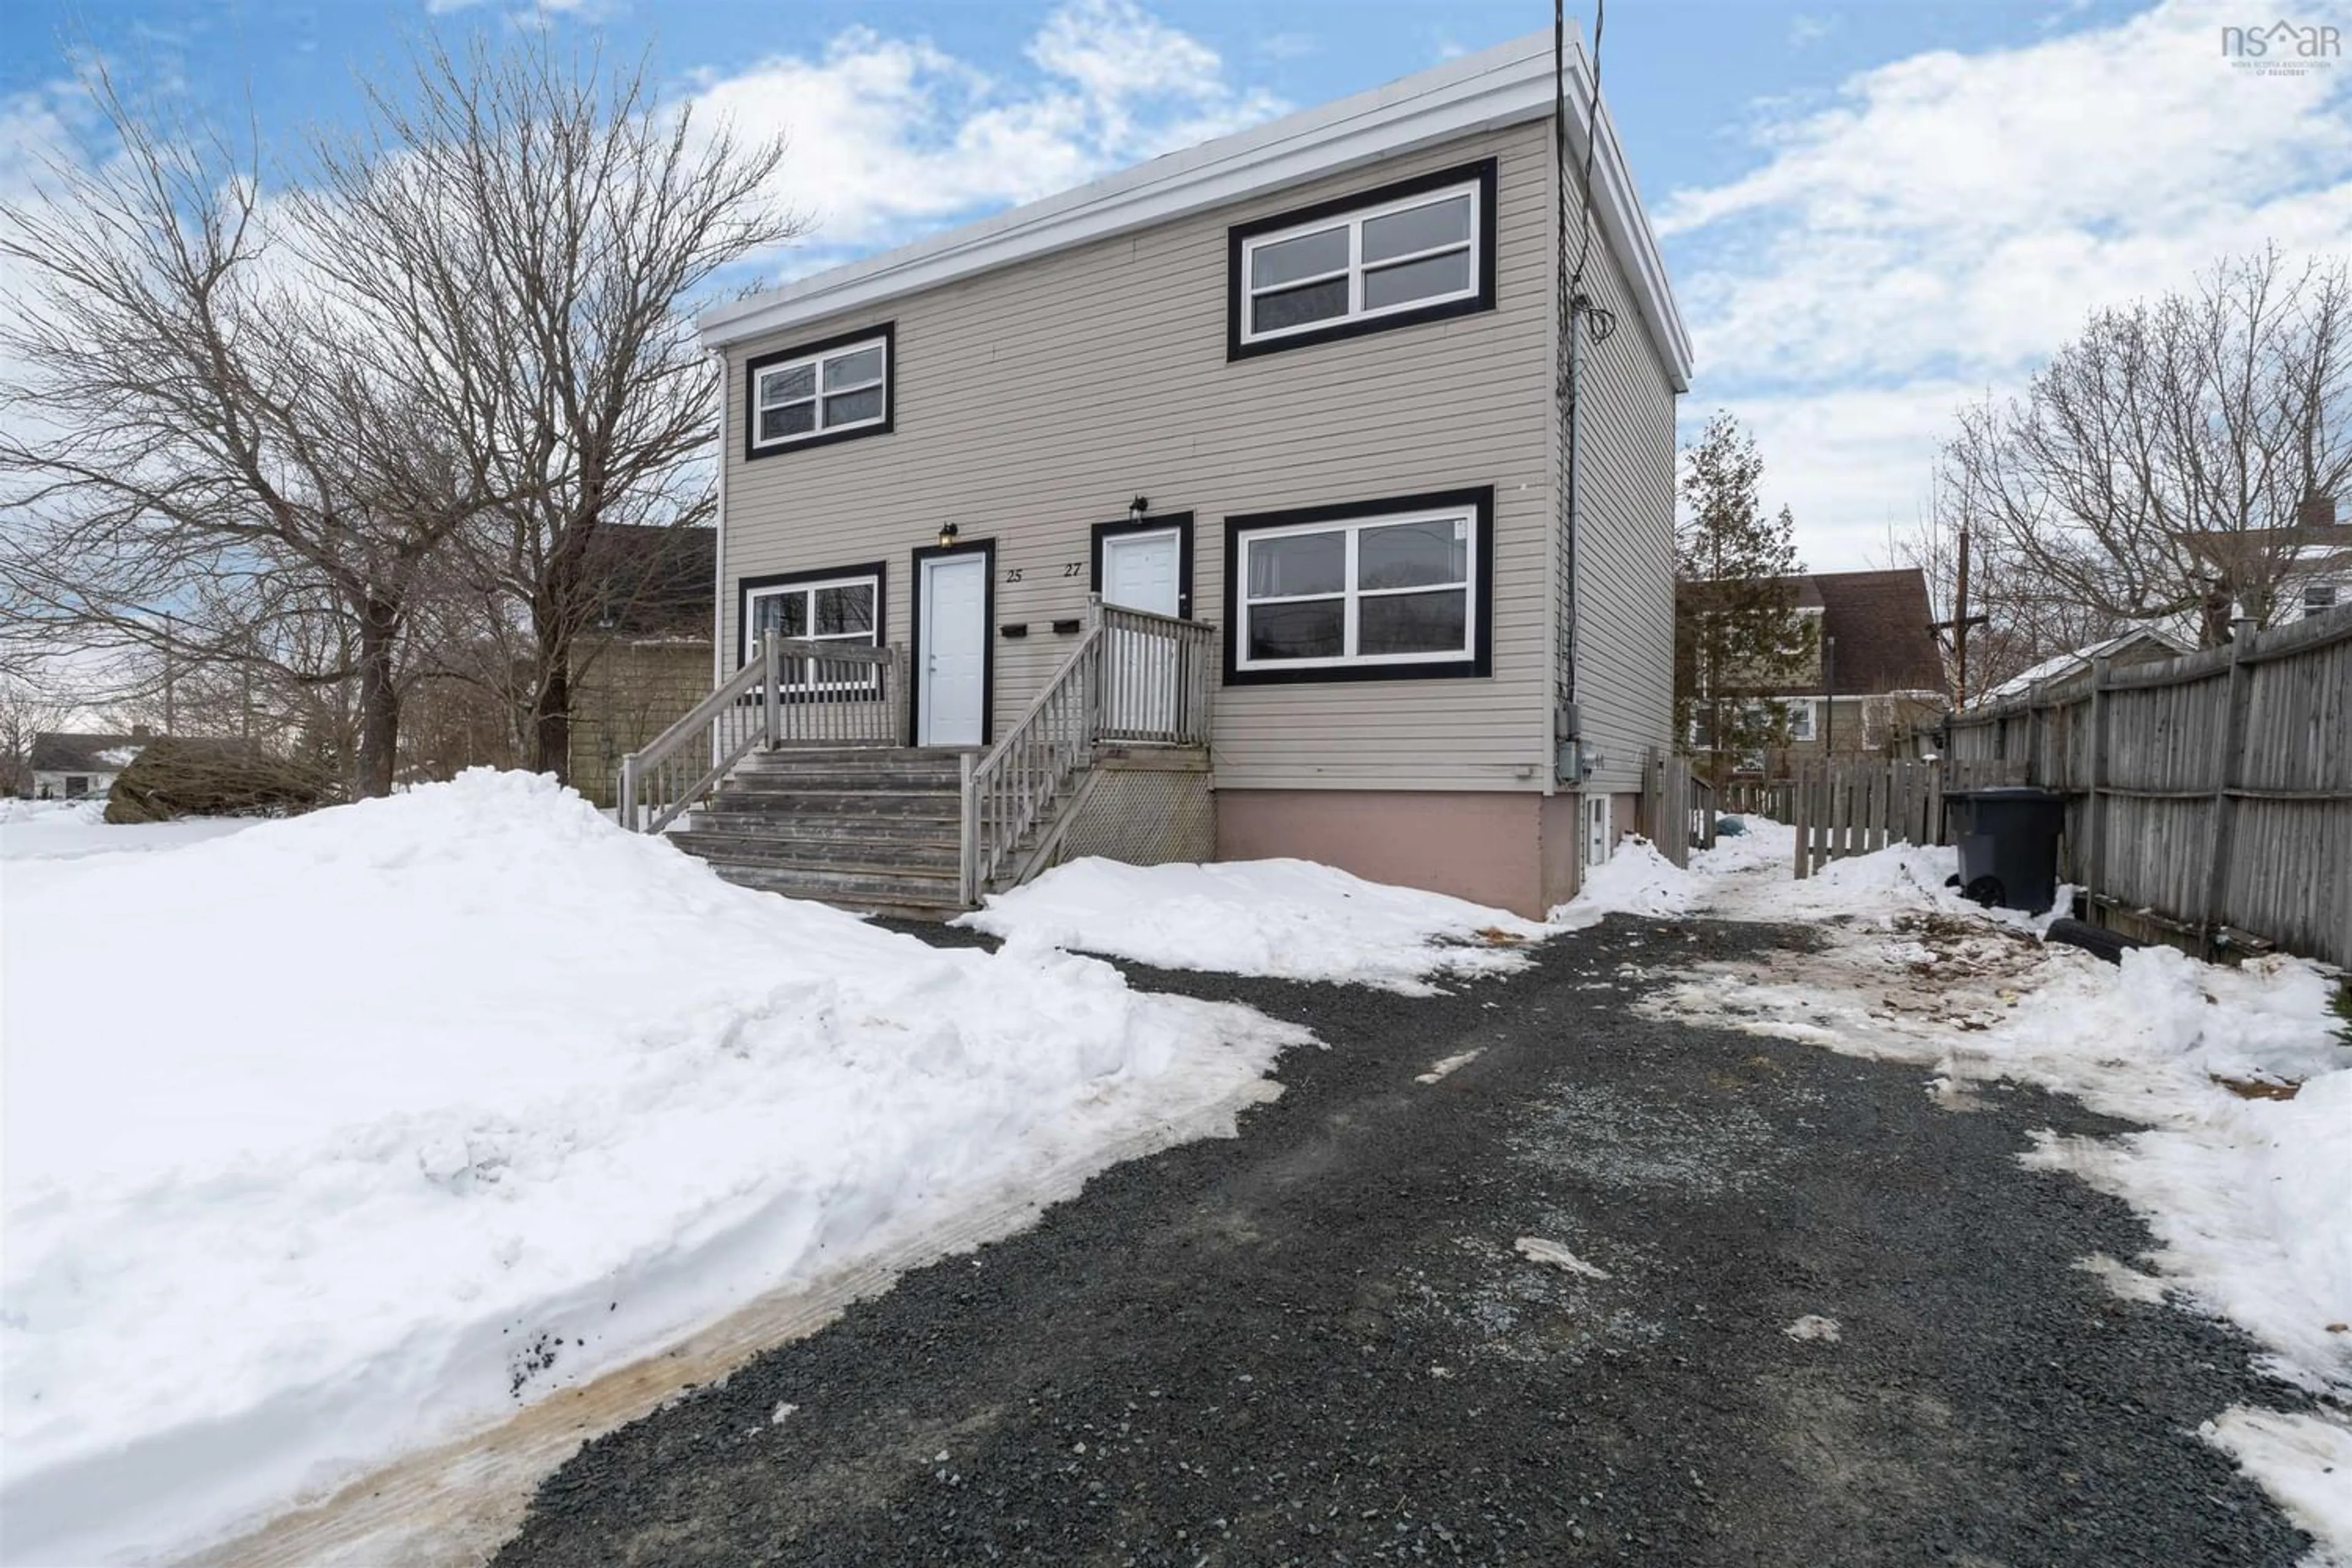 Home with unknown exterior material for 25 & 27 Esson Rd, Dartmouth Nova Scotia B2Y 2J1